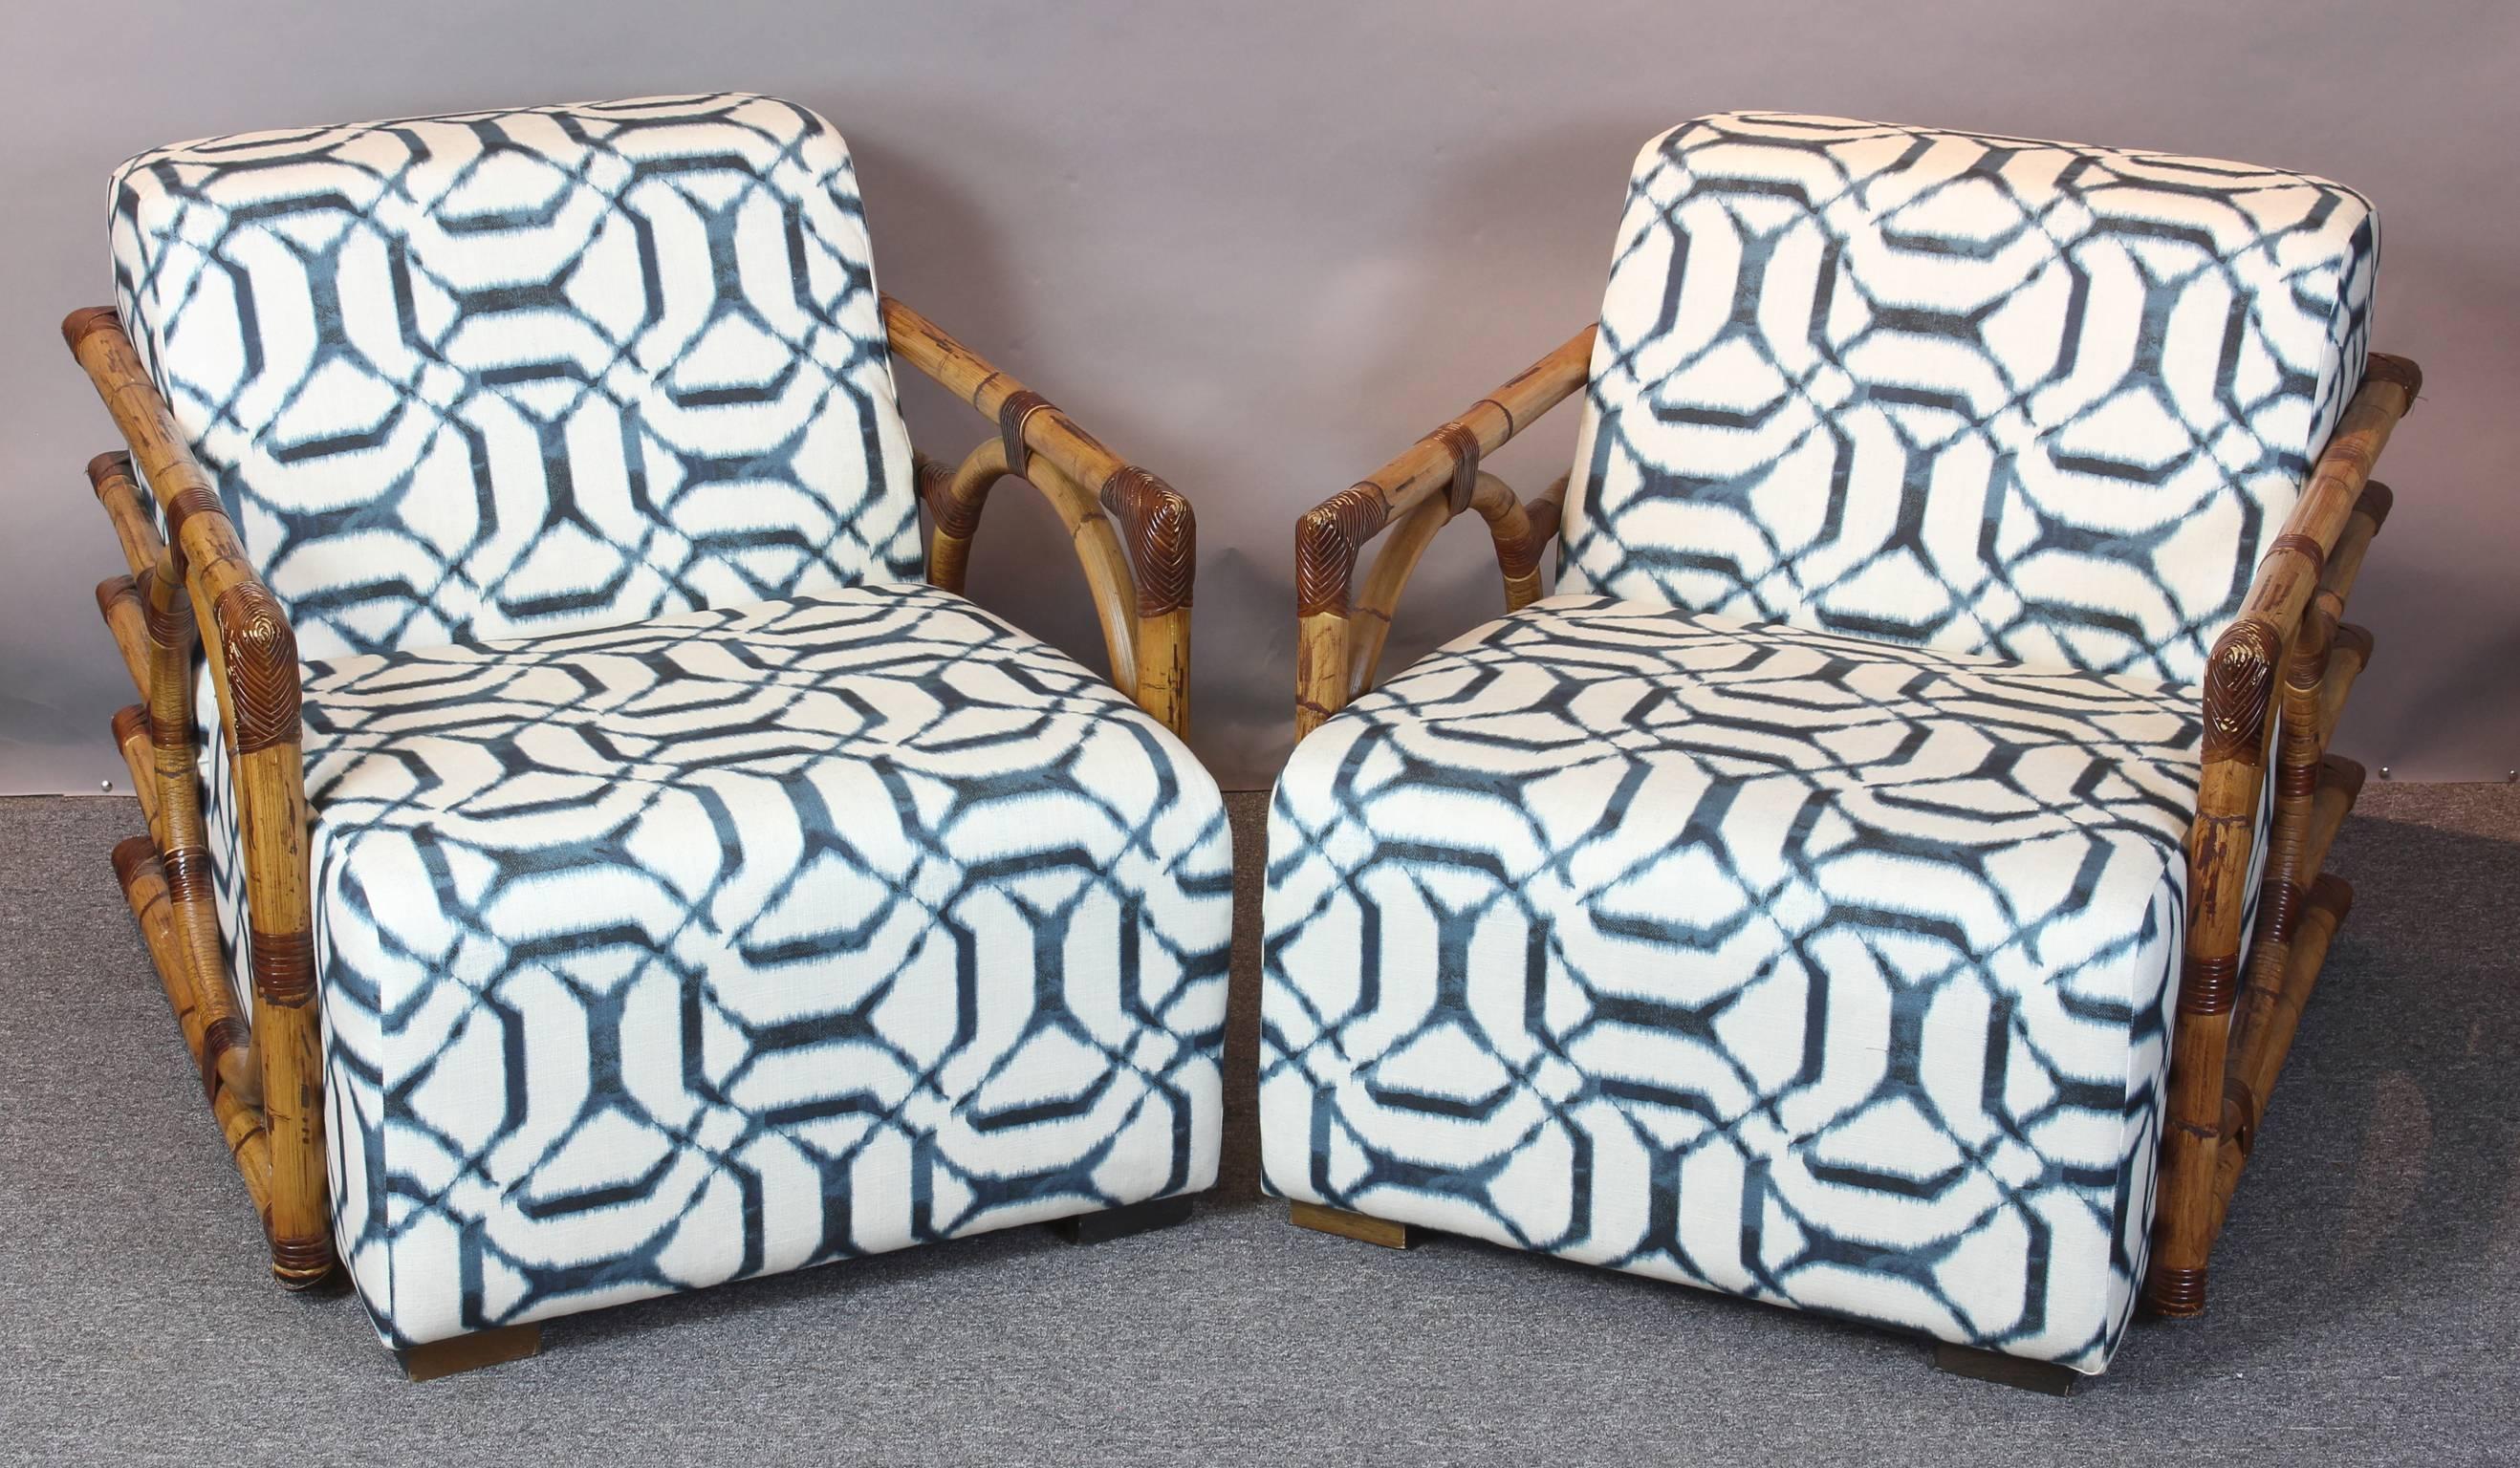 Mid-20th Century Pair of Art Deco Inspired Rattan Lounge Chairs